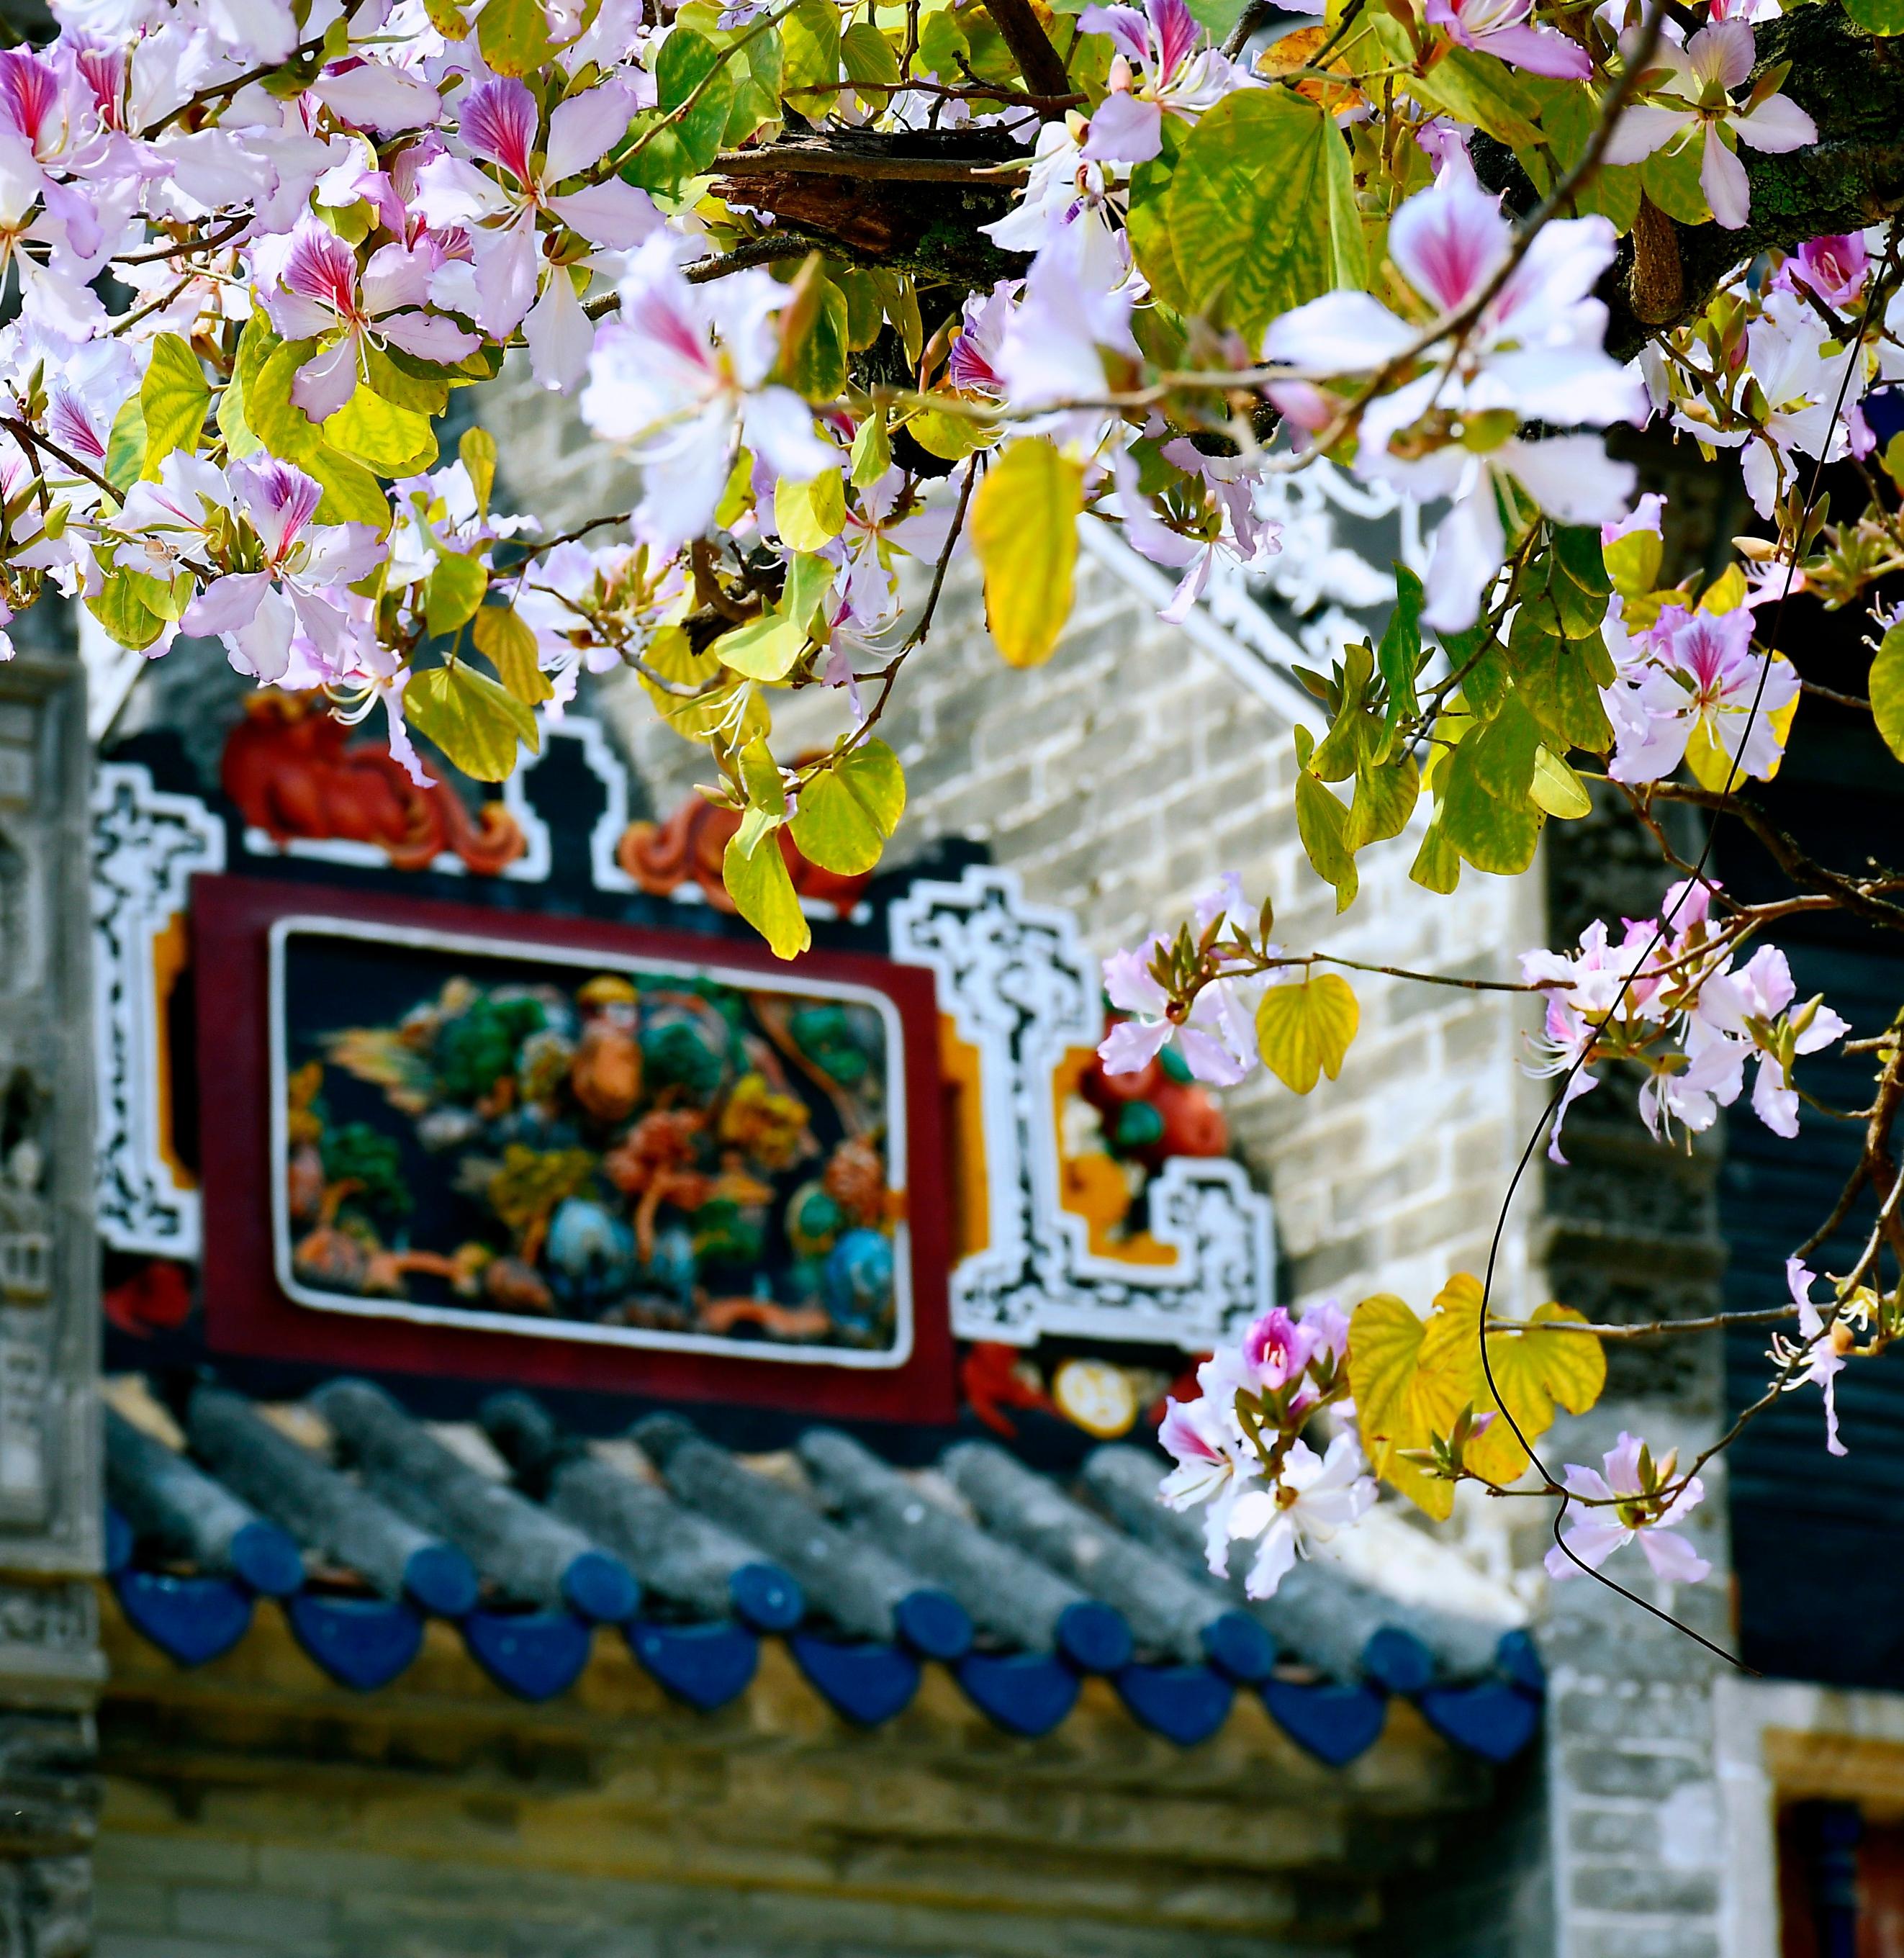 #THISISGZIKNOW# Photos & video | When spring comes to the Yuyin Garden